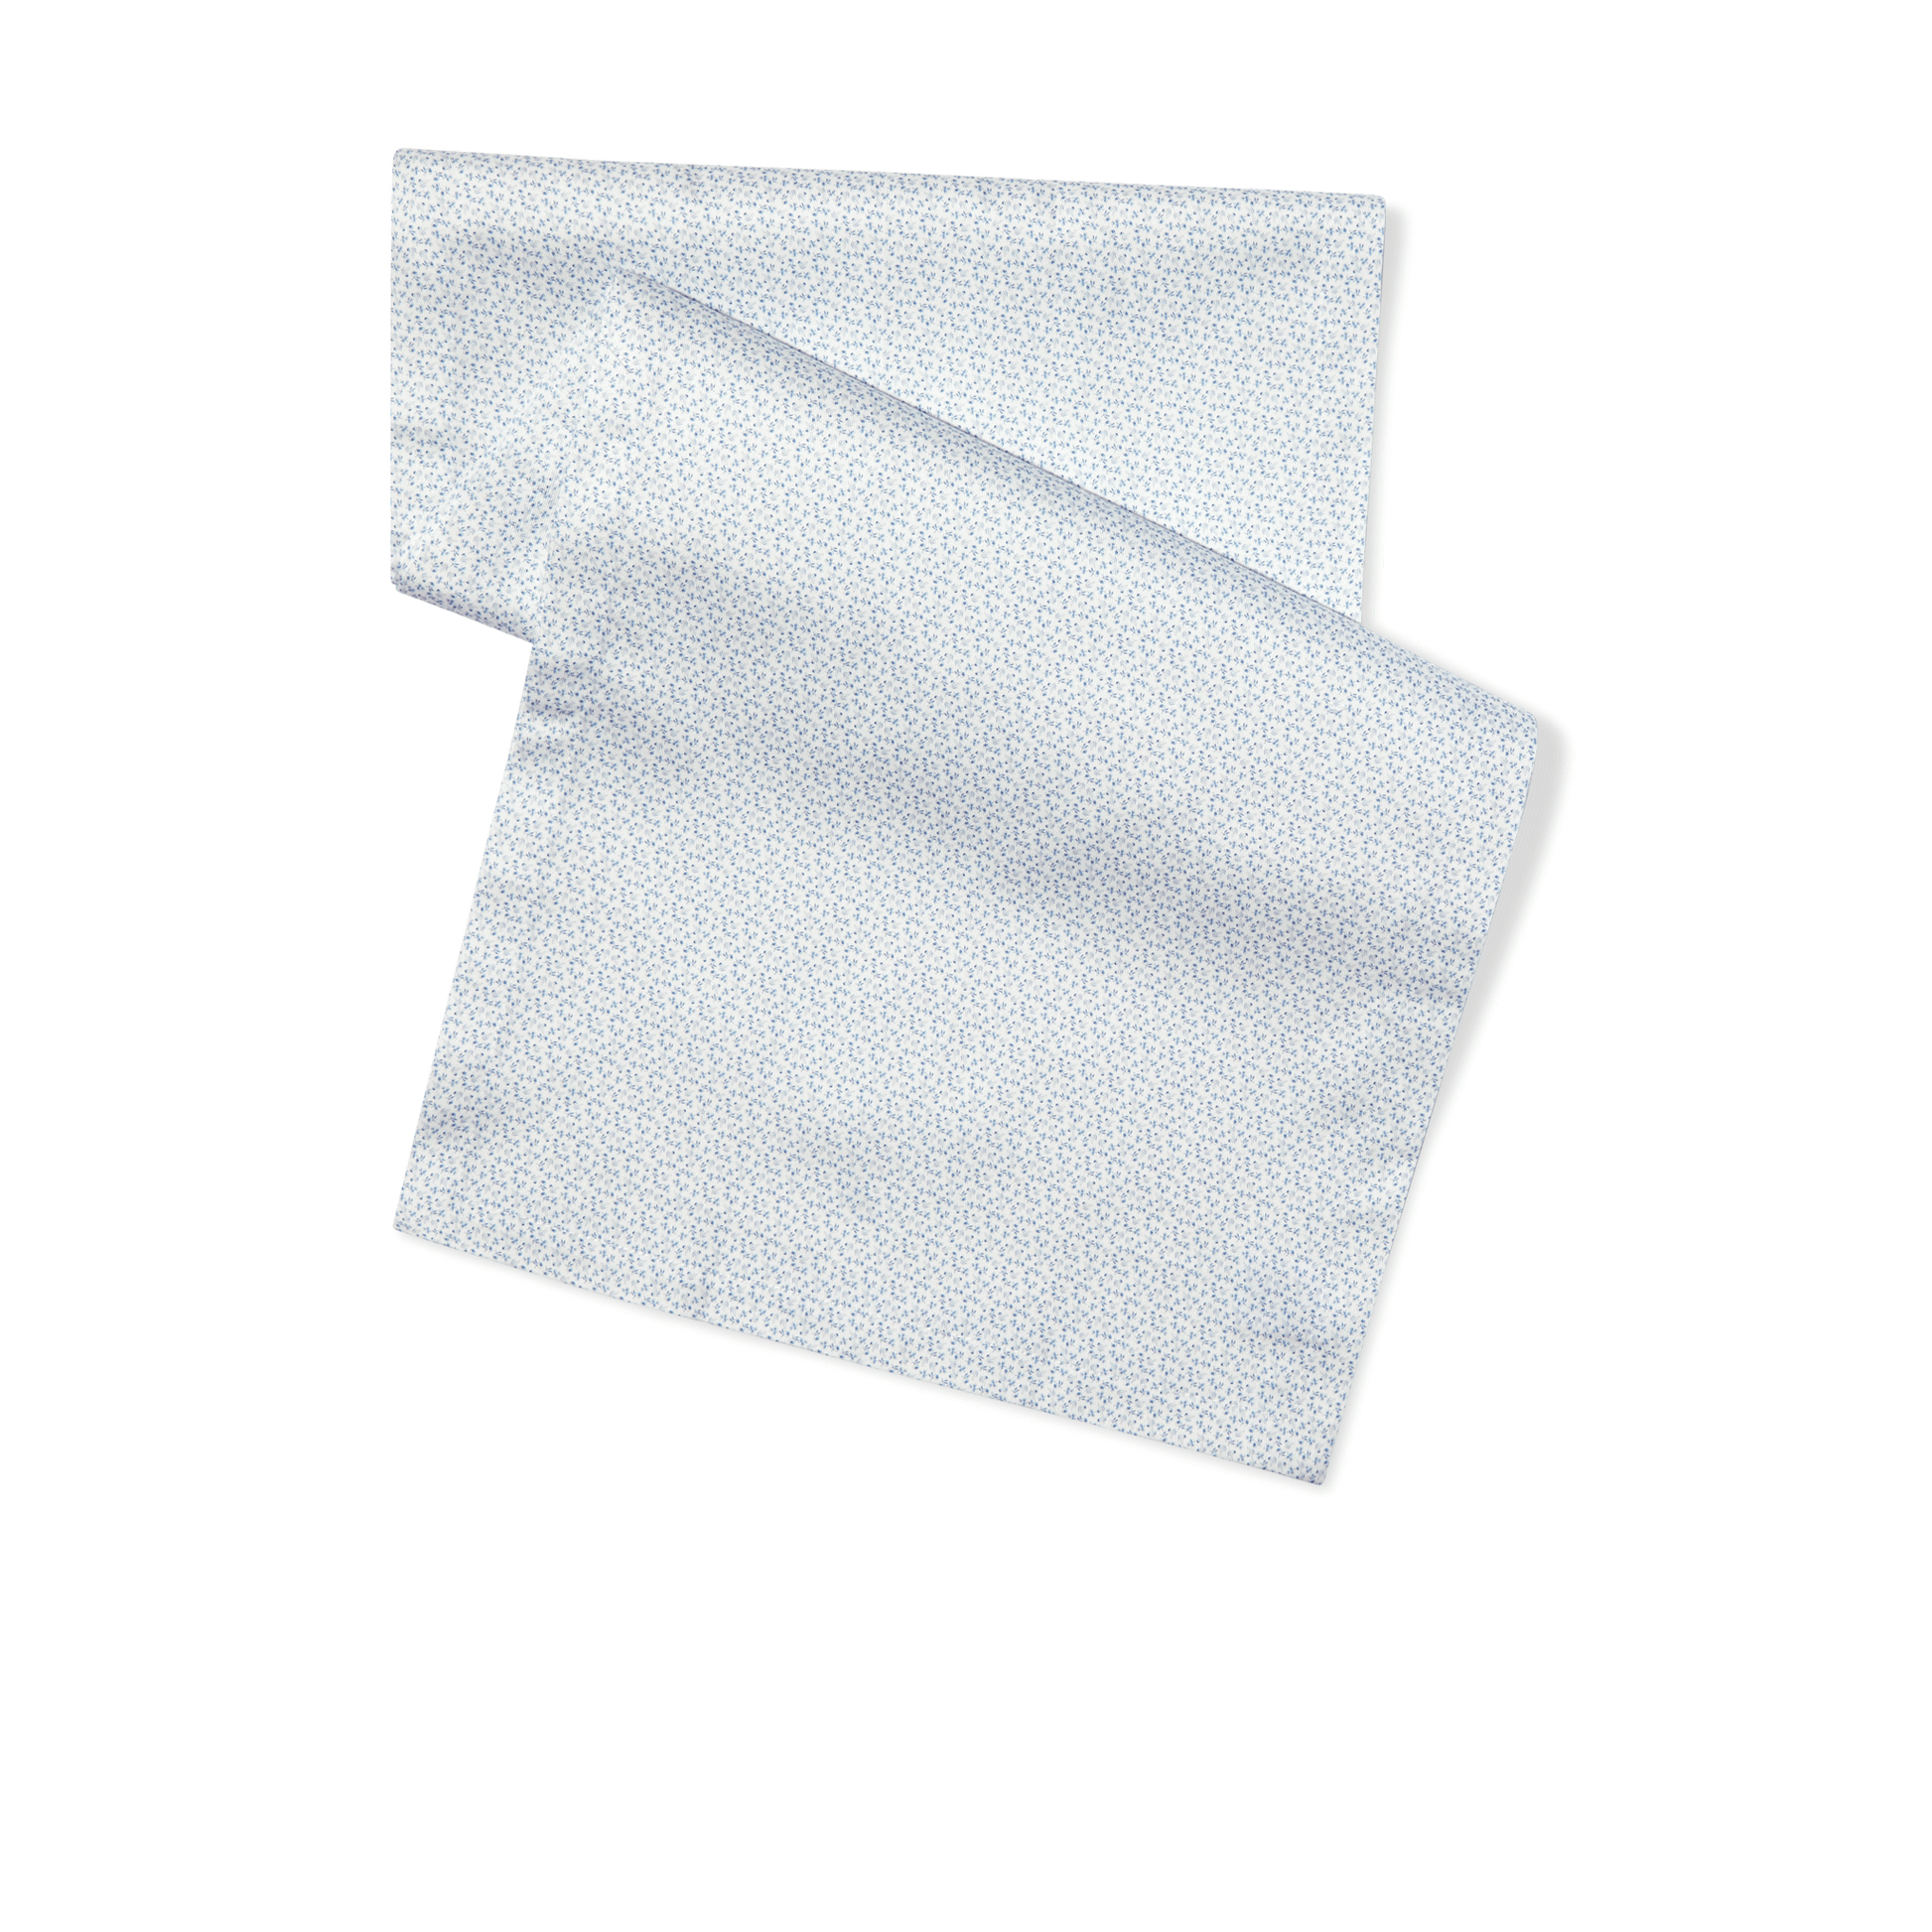 Table Runner Sarah Flint x Maman Blue And White Ditsy Floral Cotton